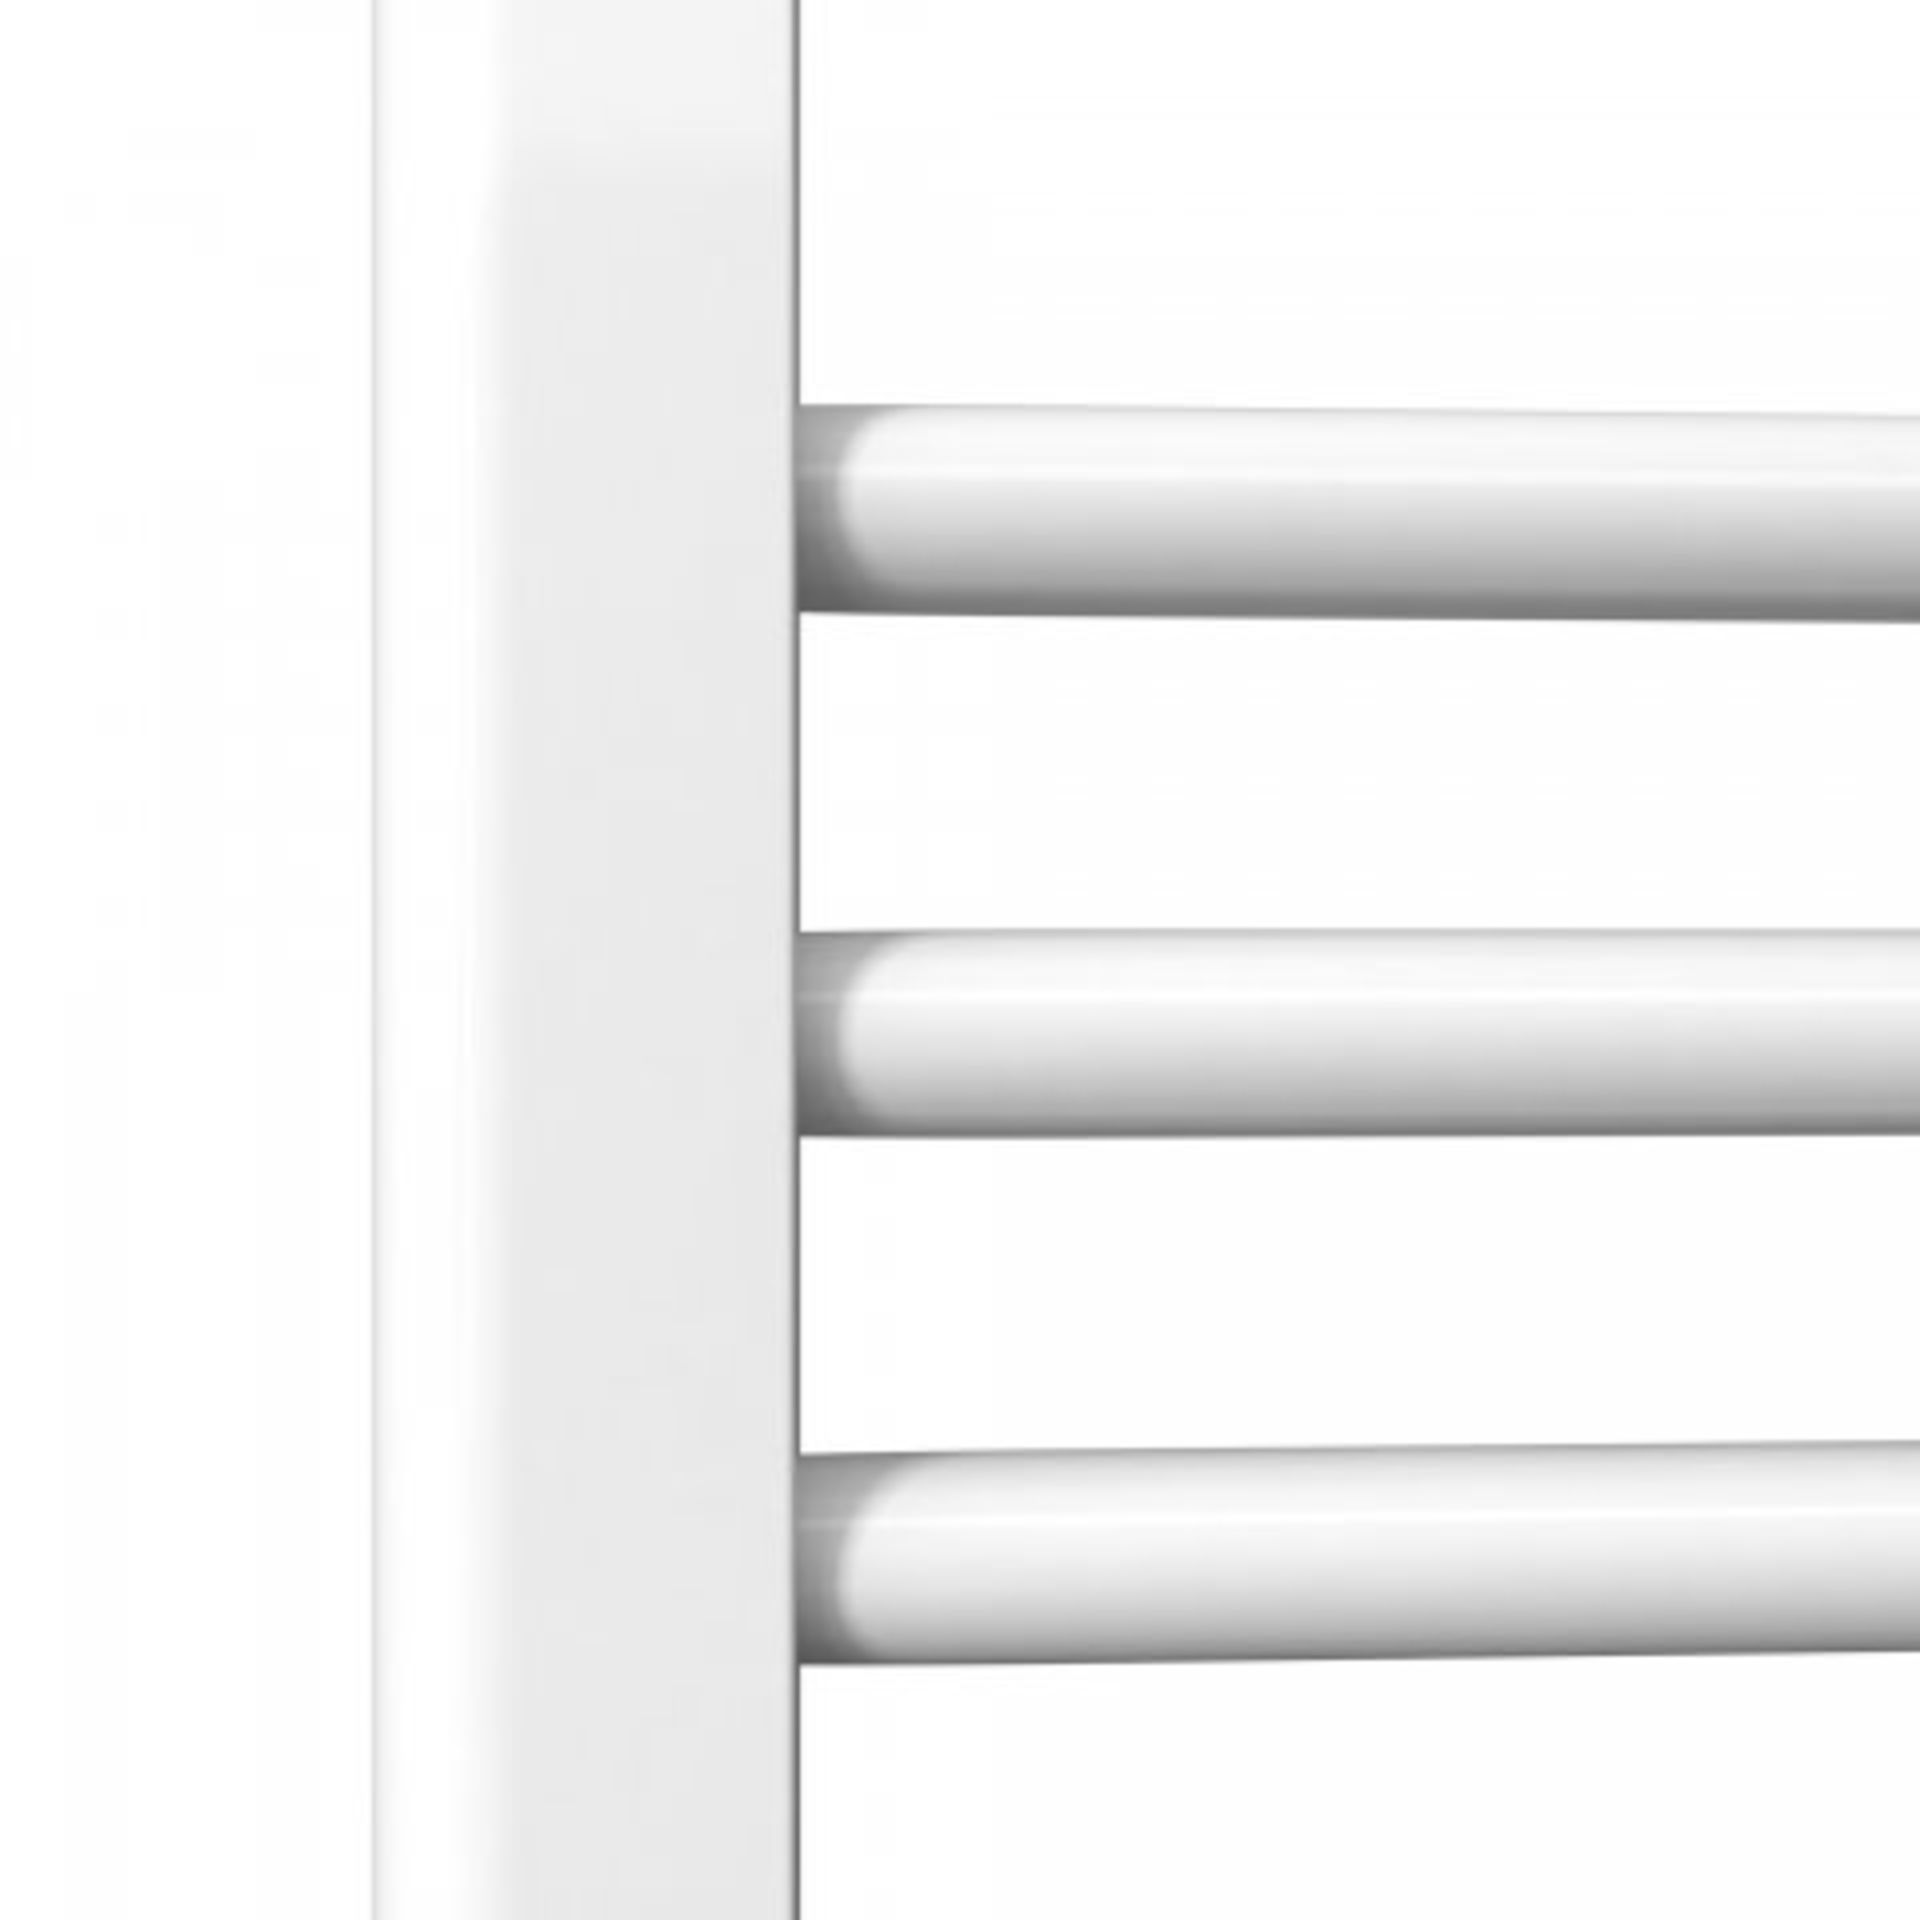 (N203) 1200x450mm White Straight Rail Ladder Towel Radiator. RRP £249.99. What heat output do I need - Image 5 of 6